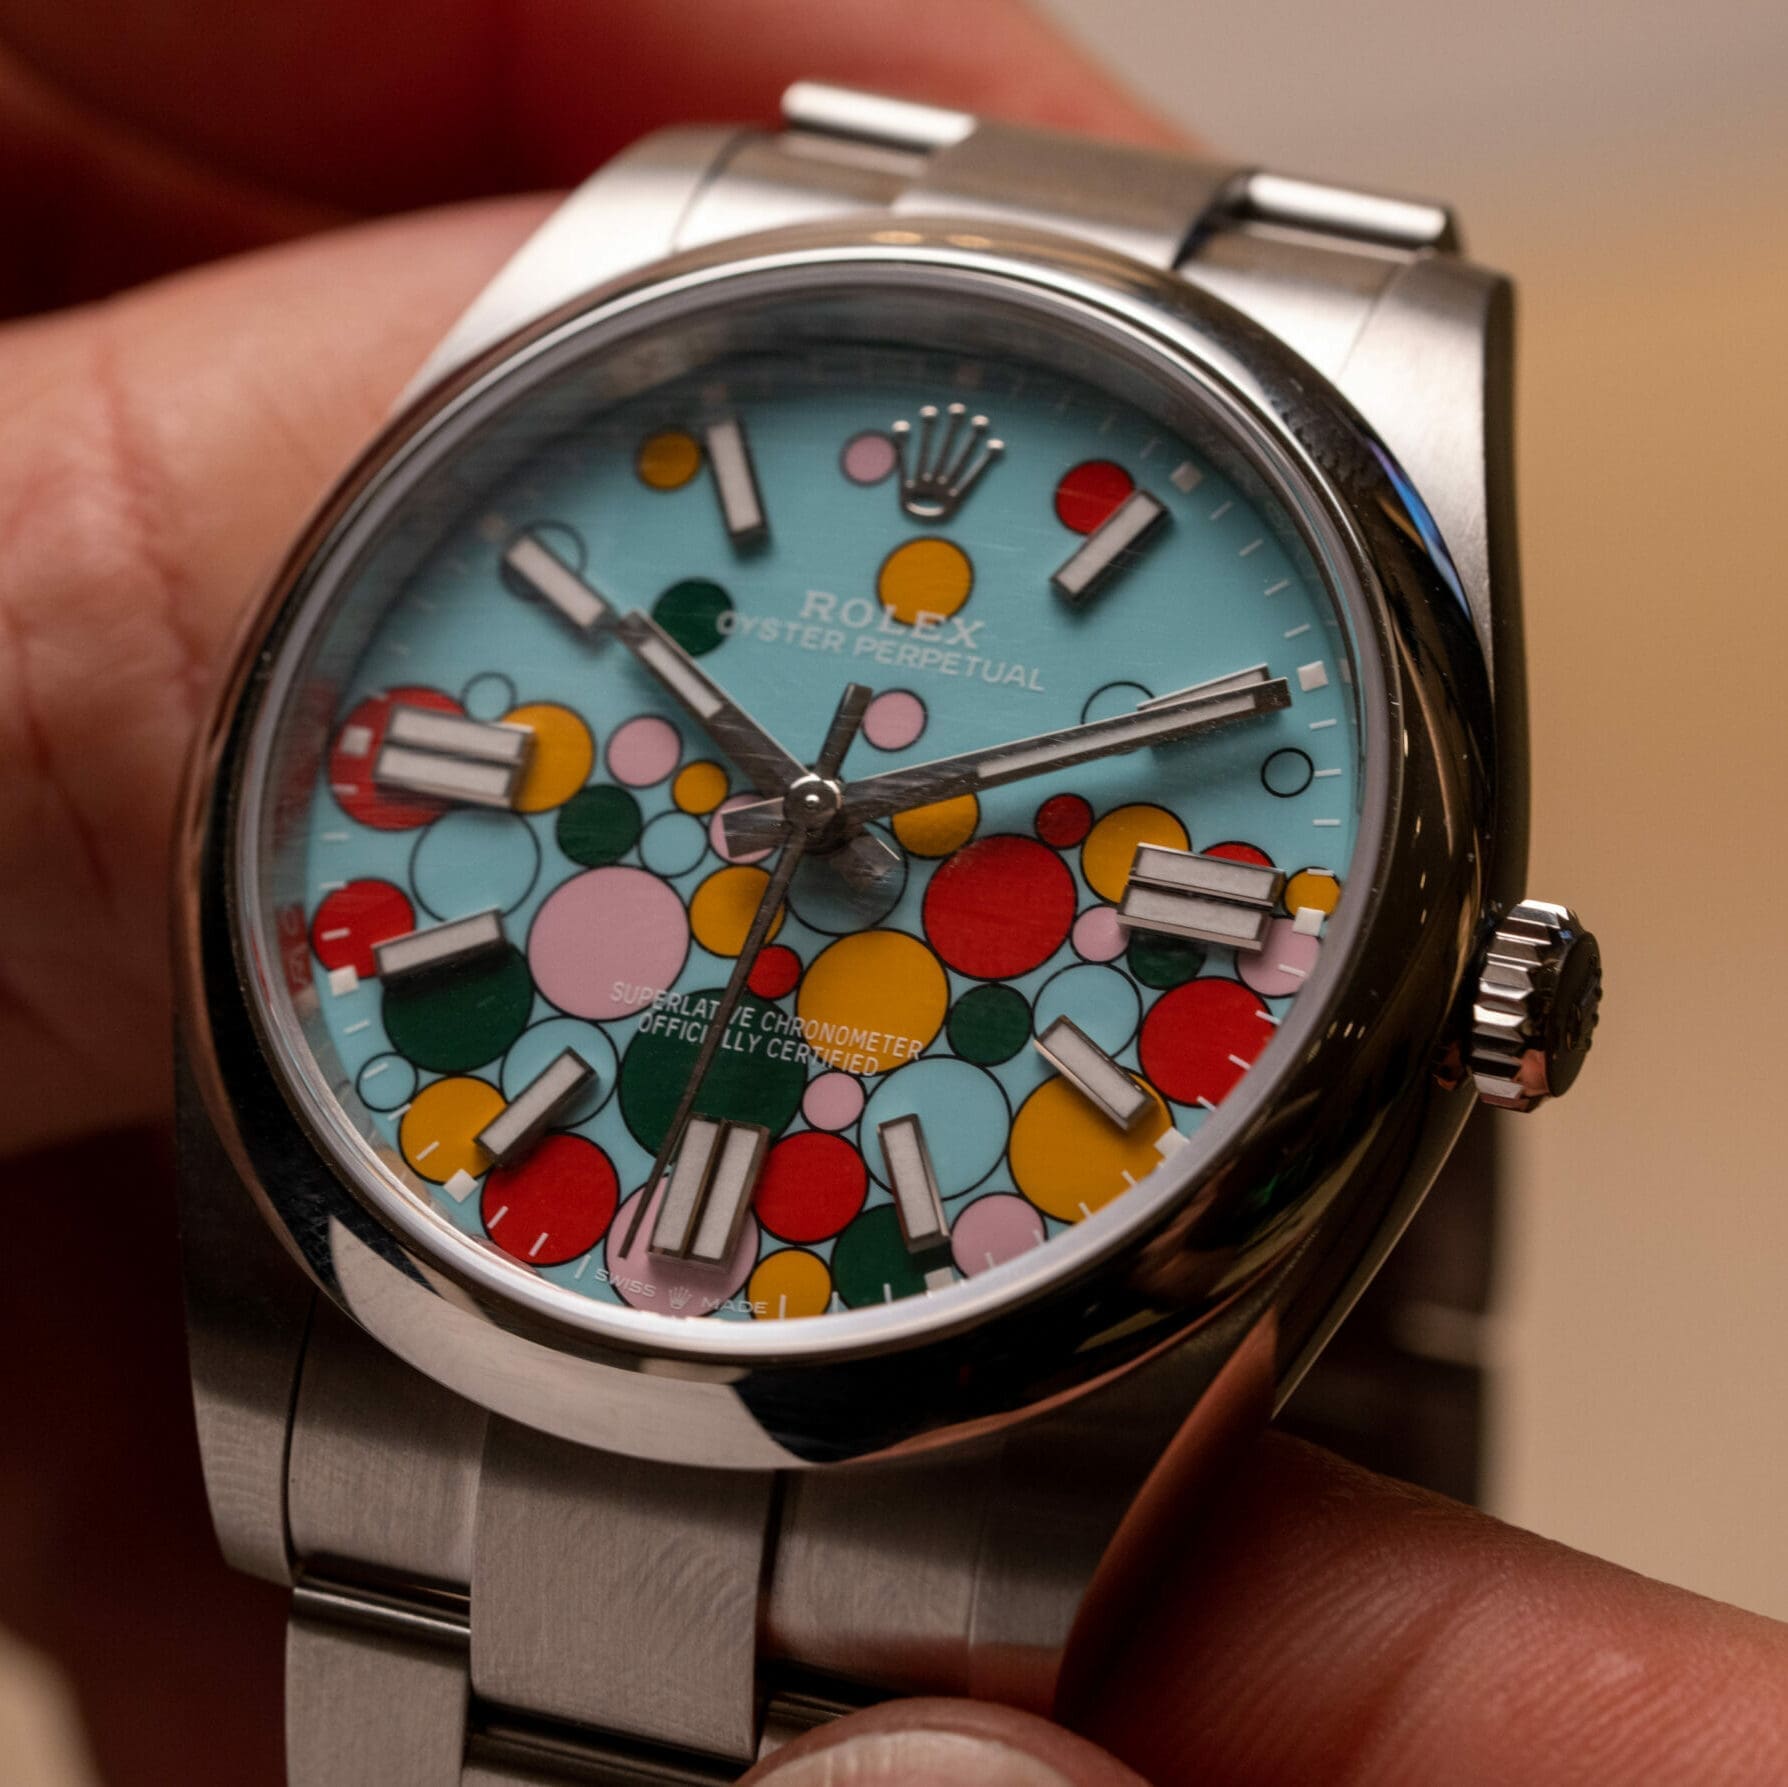 The Rolex Oyster Perpetual Celebration Dial is starting to hit the secondary market. Shocker, it is priced high…